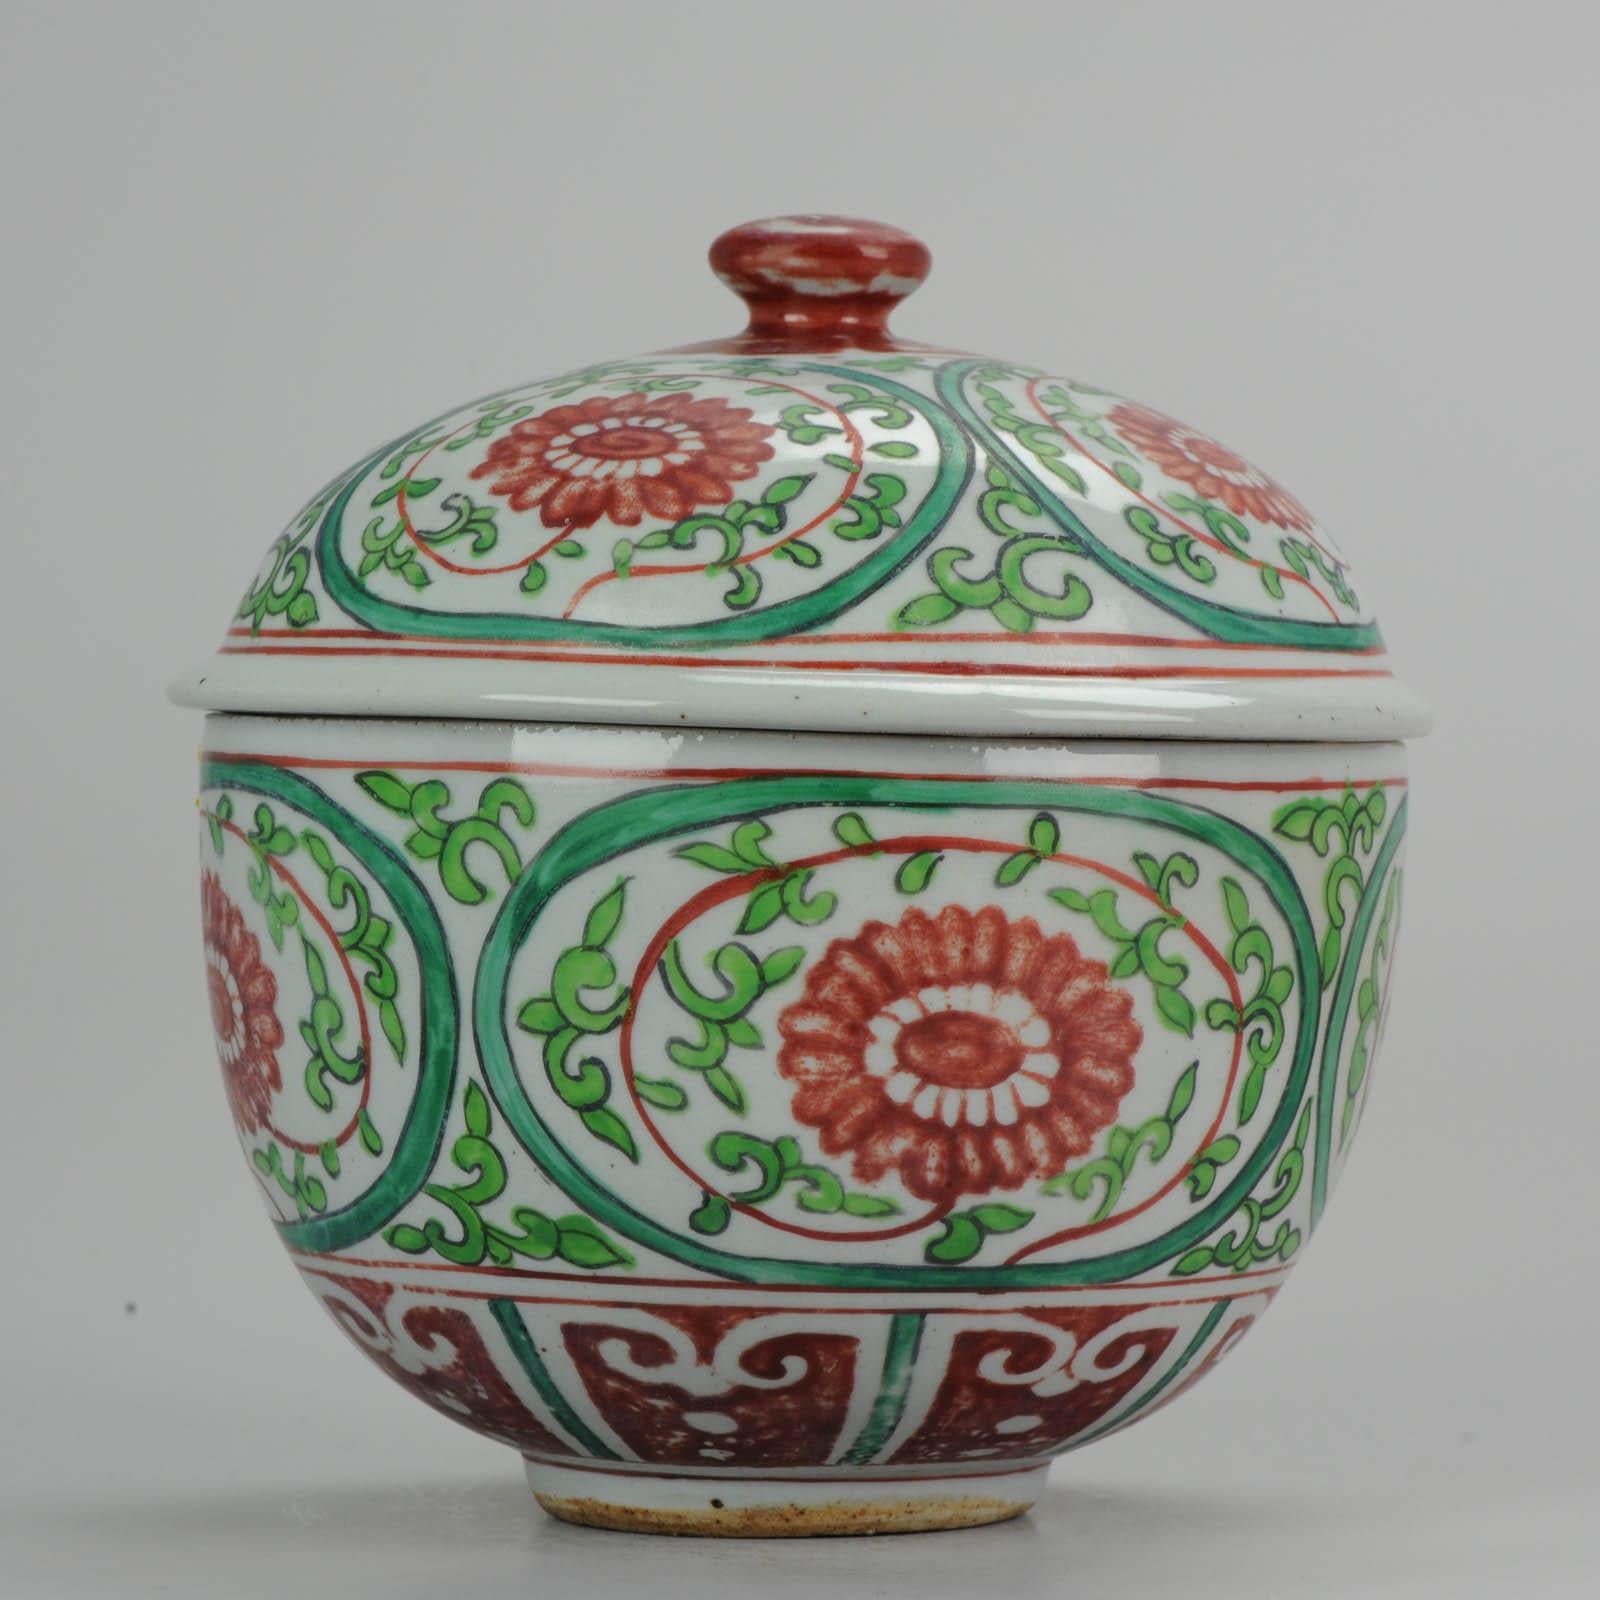 Qing Antique Chinese Porcelain Jar 18th Century SE Asian Thai Market Bencharong Peony For Sale